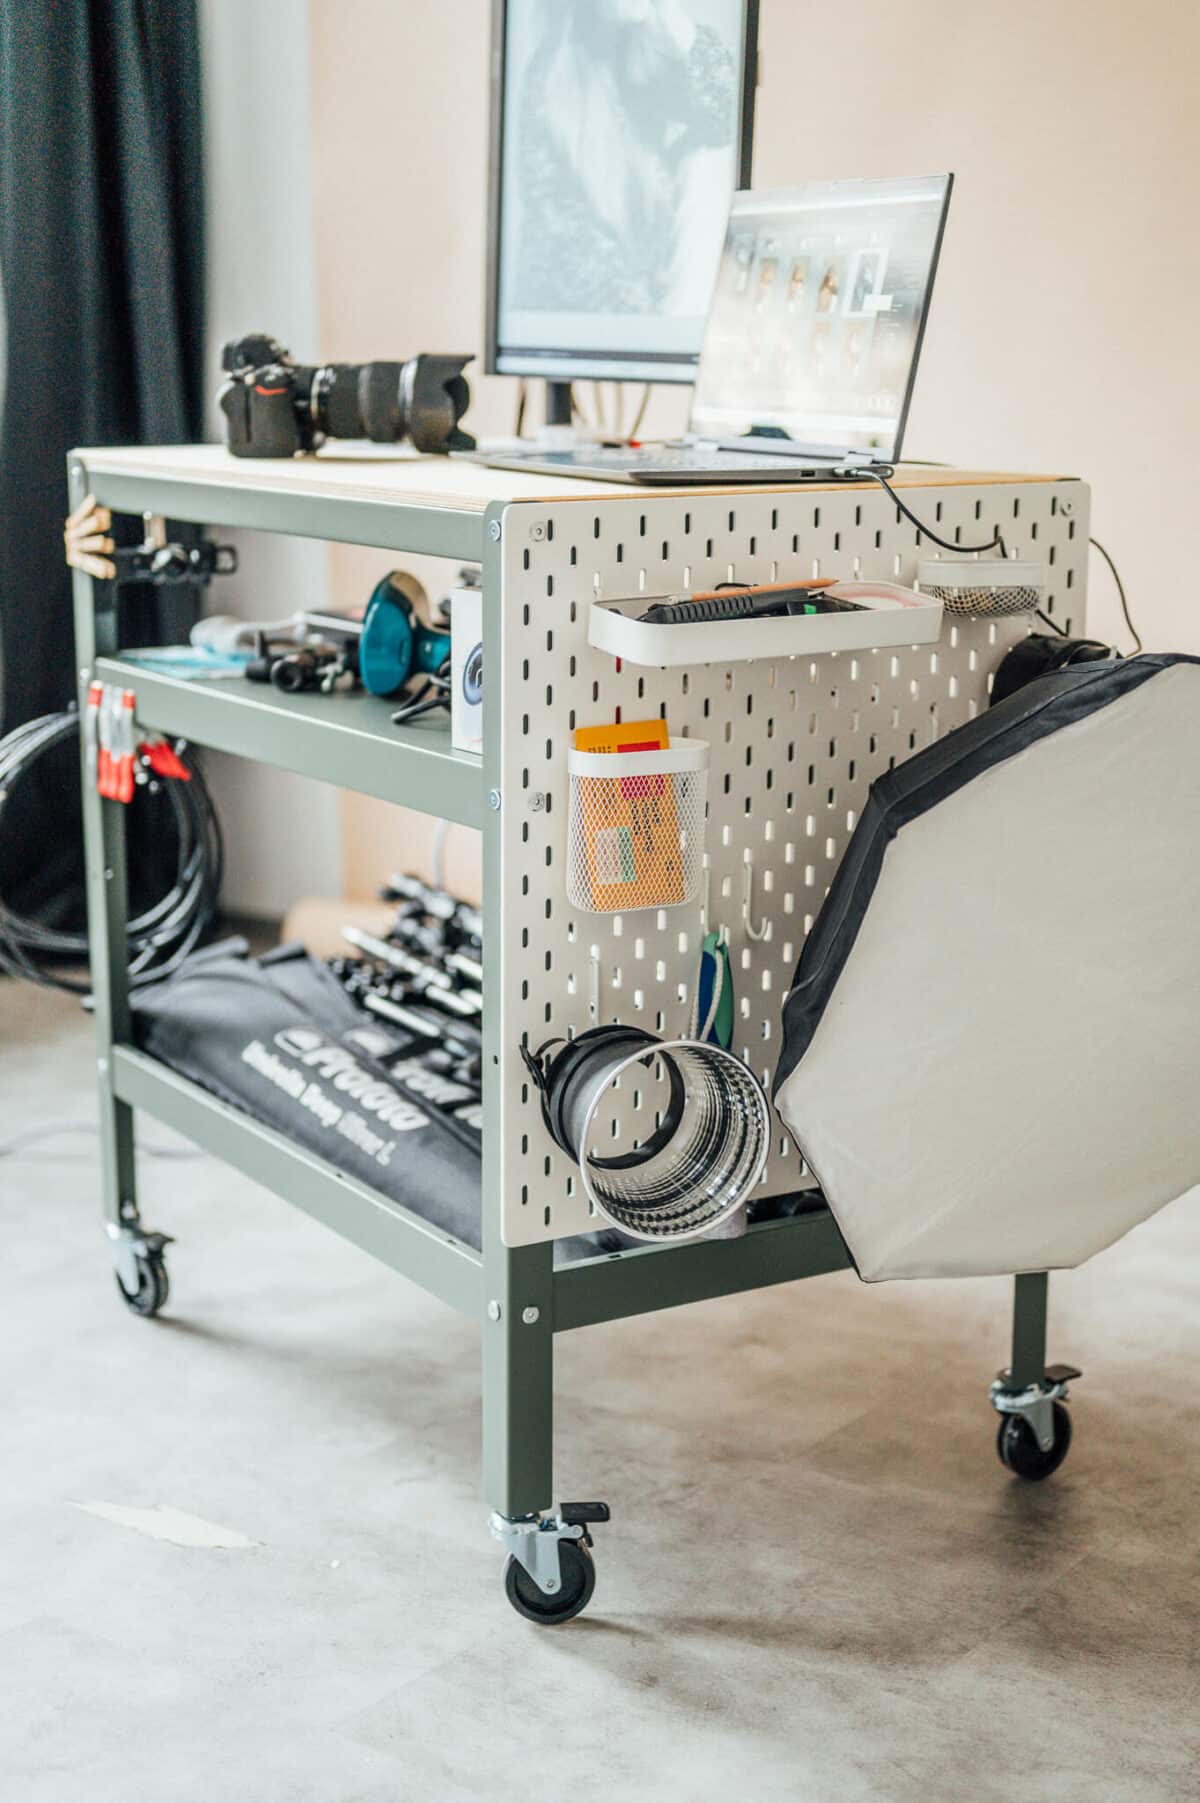 Photography tether table and cart from IKEA parts